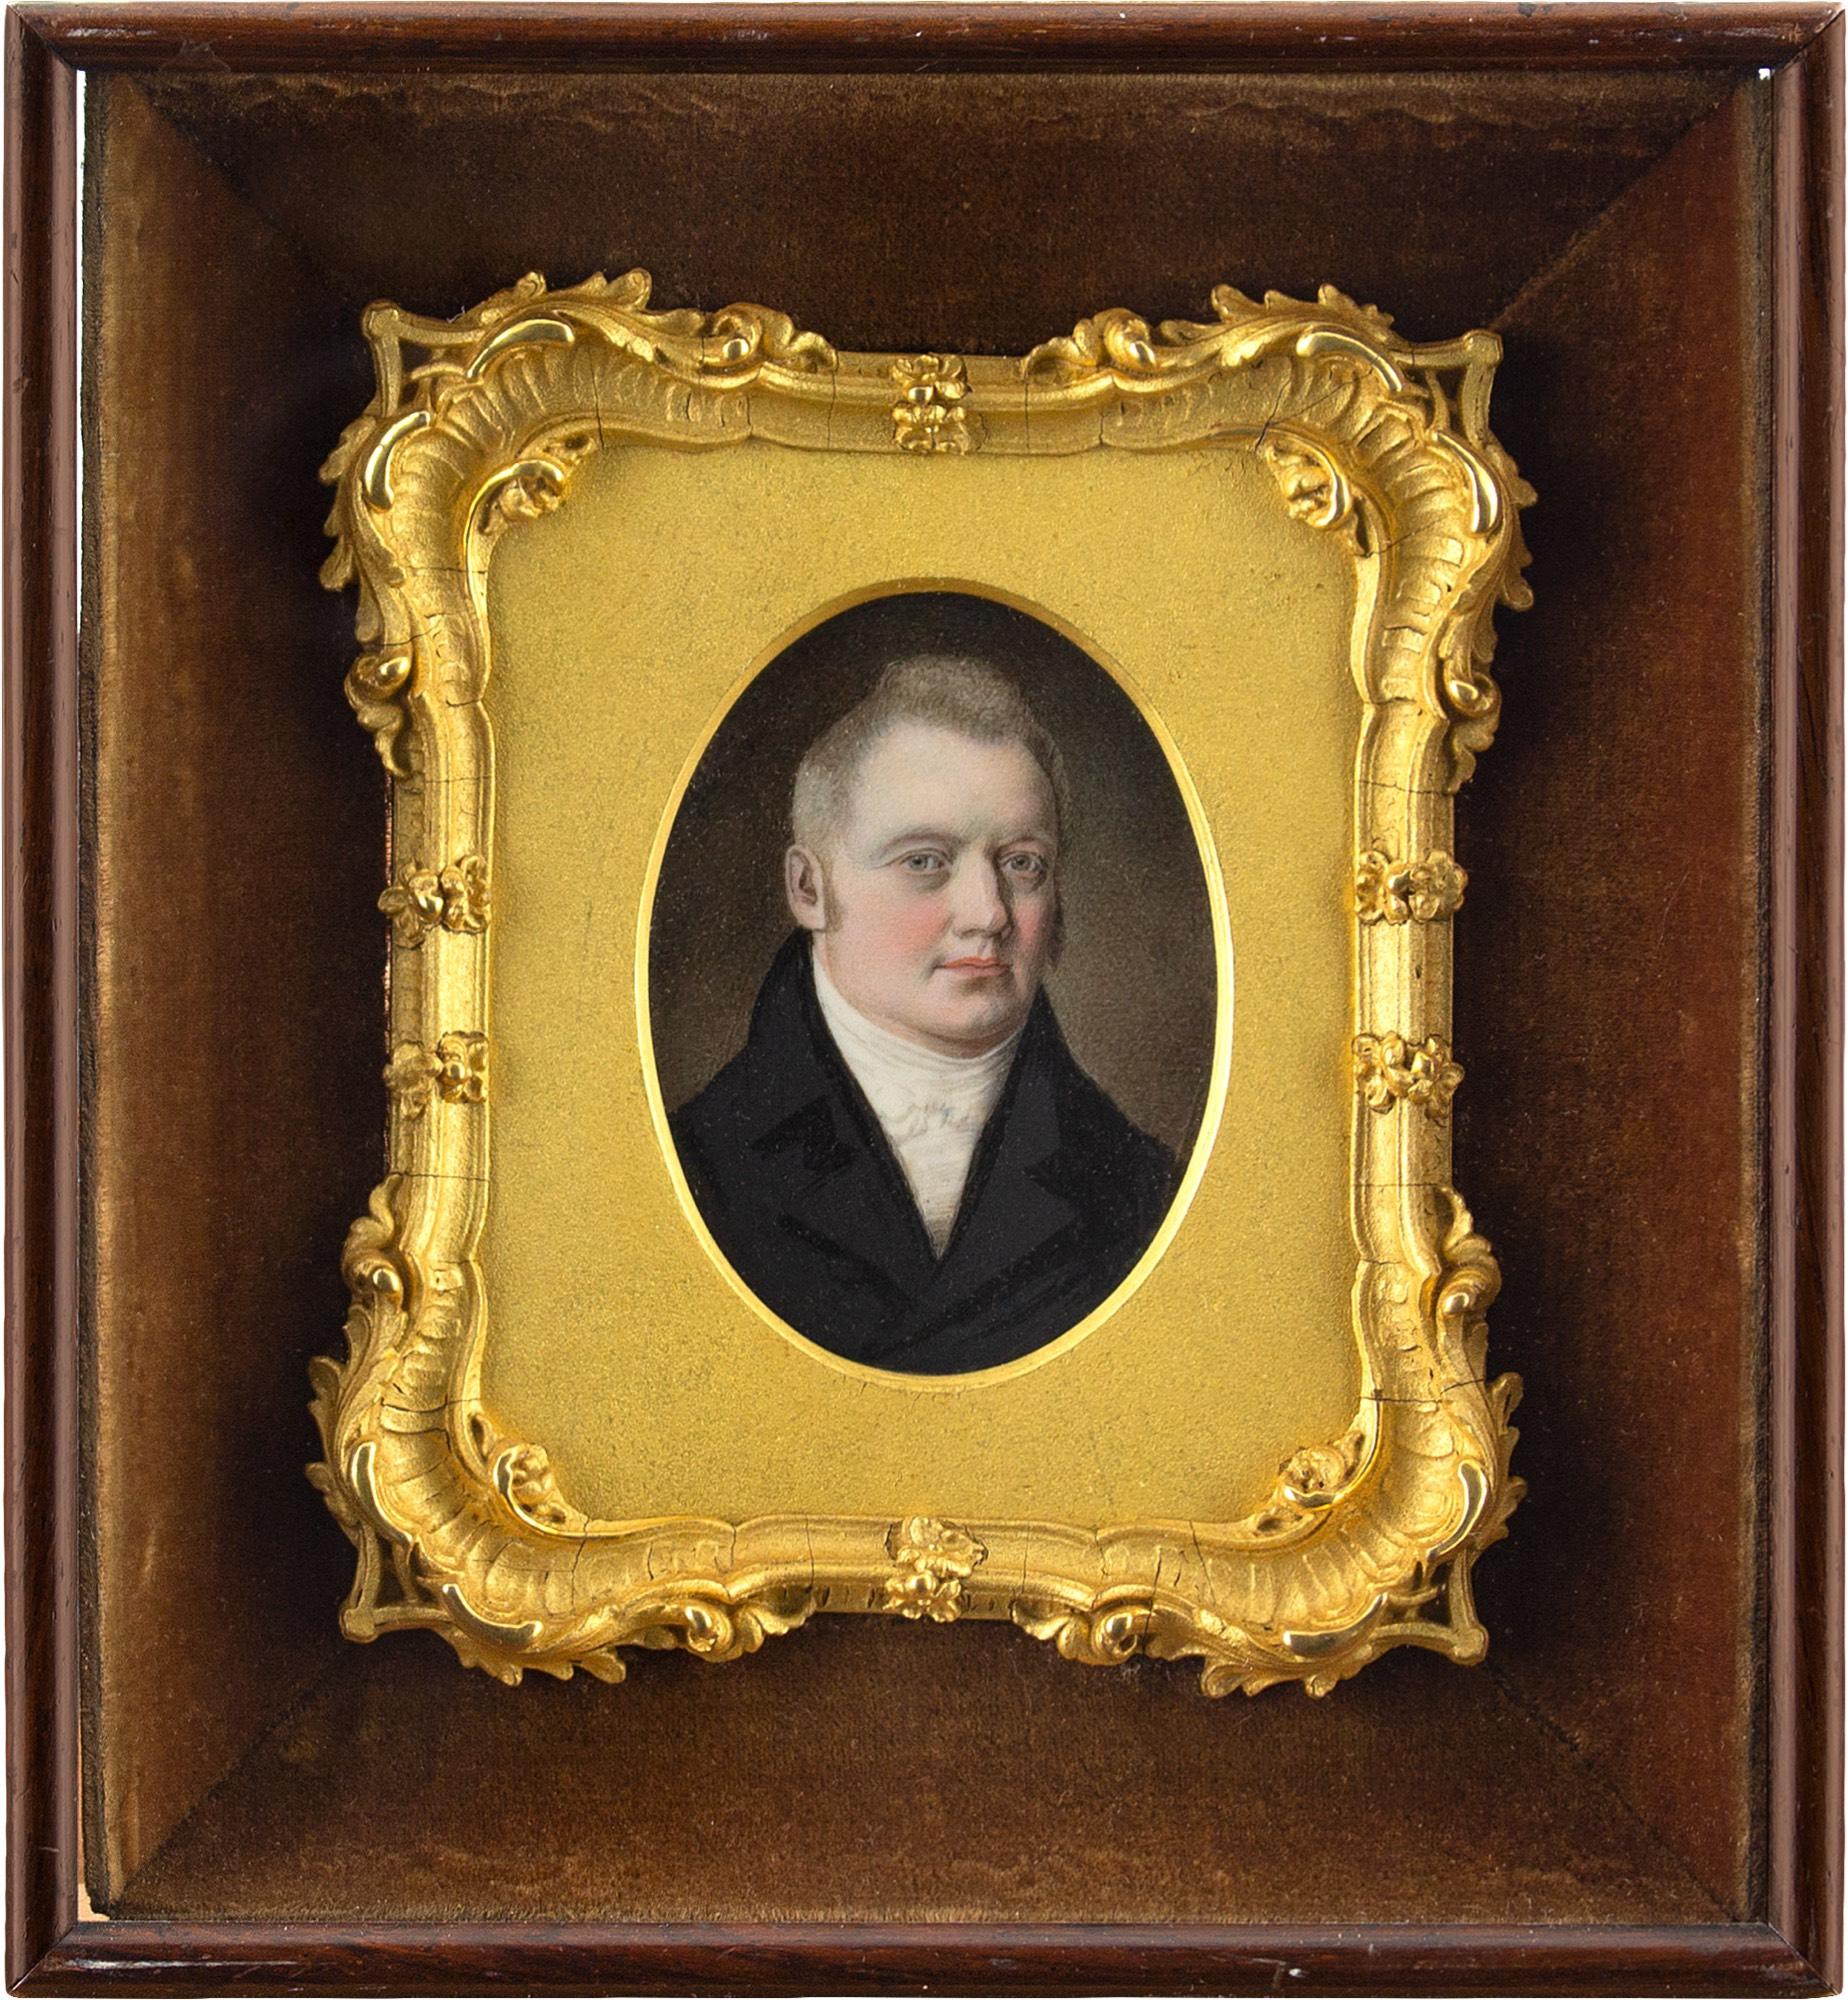 Unknown Portrait Painting - Early 19th-Century Miniature Portrait Of A Gentleman, Oil On Card